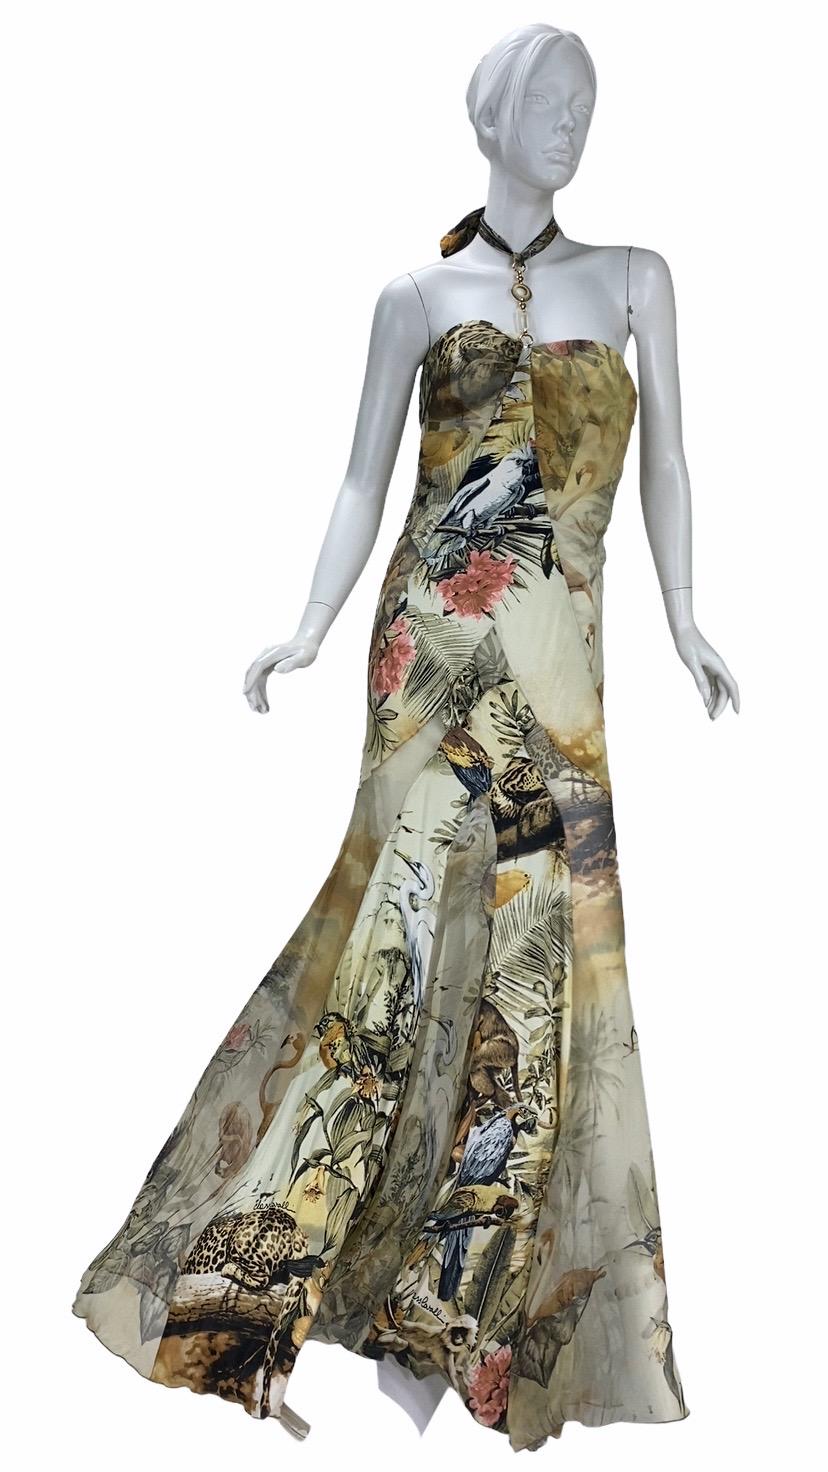 Roberto Cavalli Class Jungle Print Silk Gown
Details:
IT Size 42 - US 6
Incredible print
Combination of smooth silk with semi sheer chiffon
Inner corset
Lining
Neck embellishment
Excellent condition